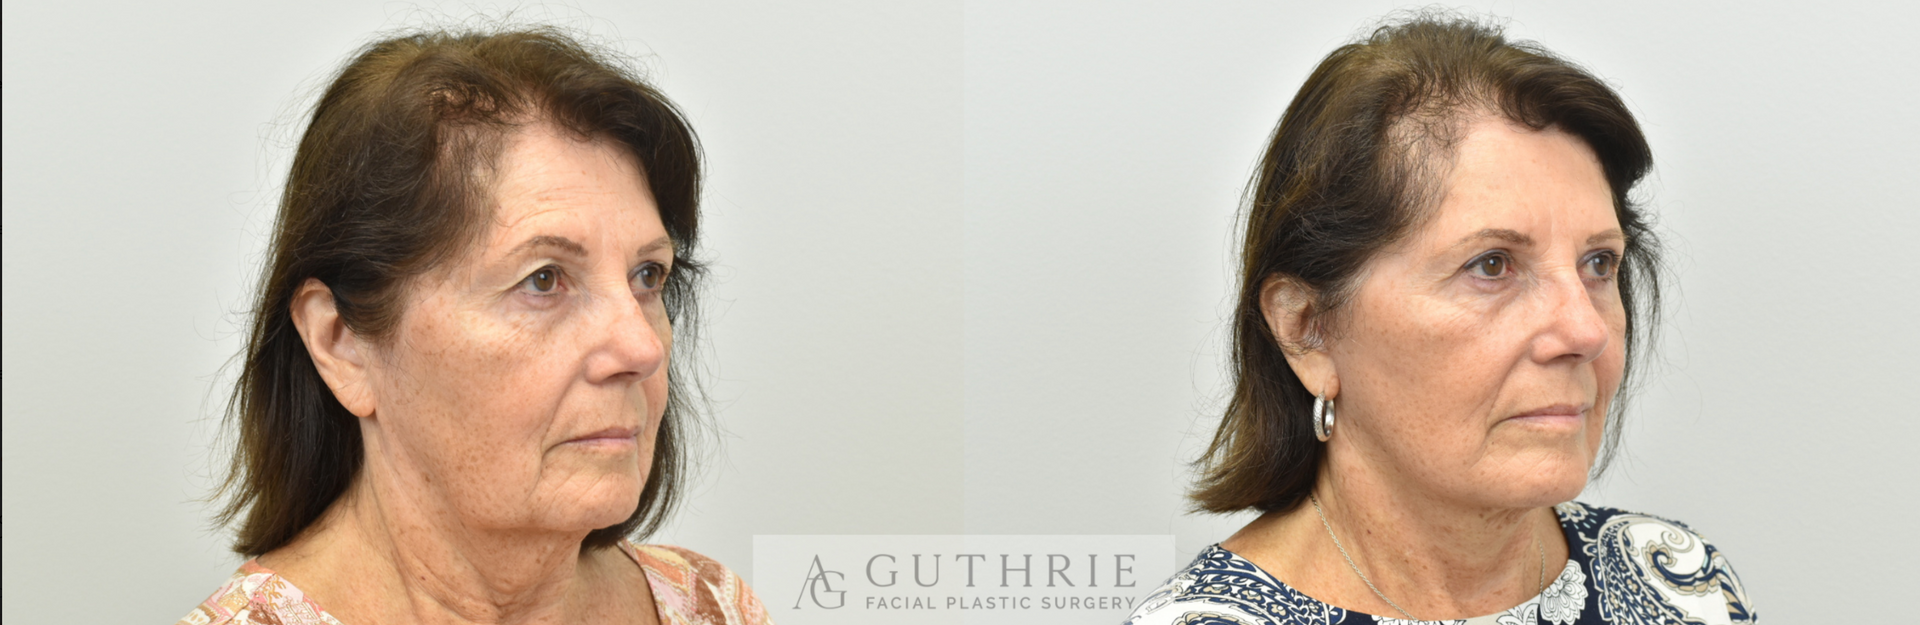 a woman's face before and after facelift procedure